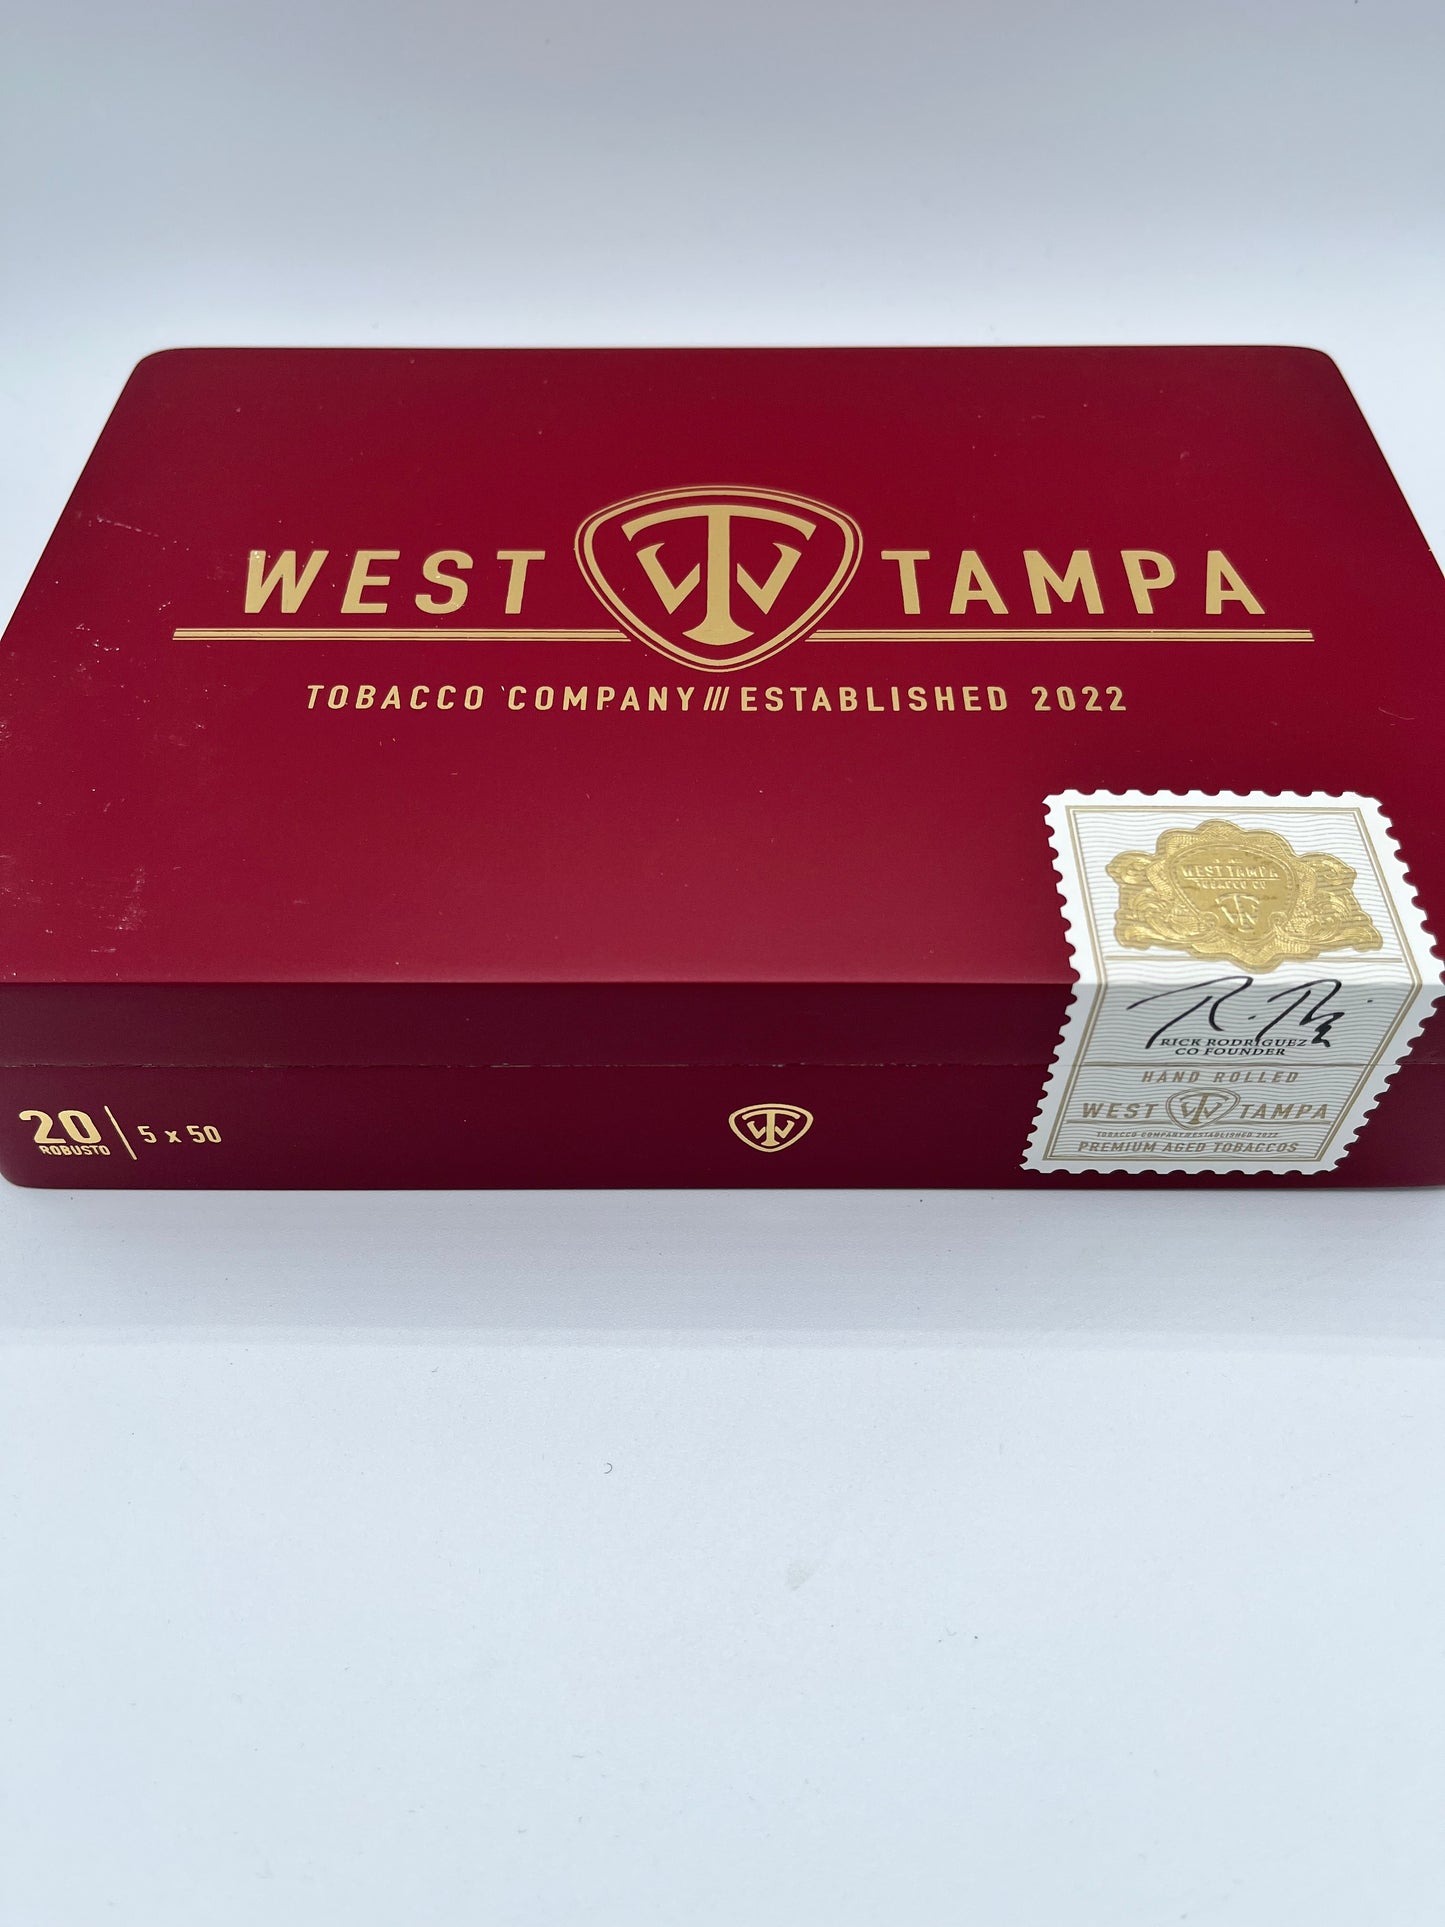 West Tampa Tobacco Company Red